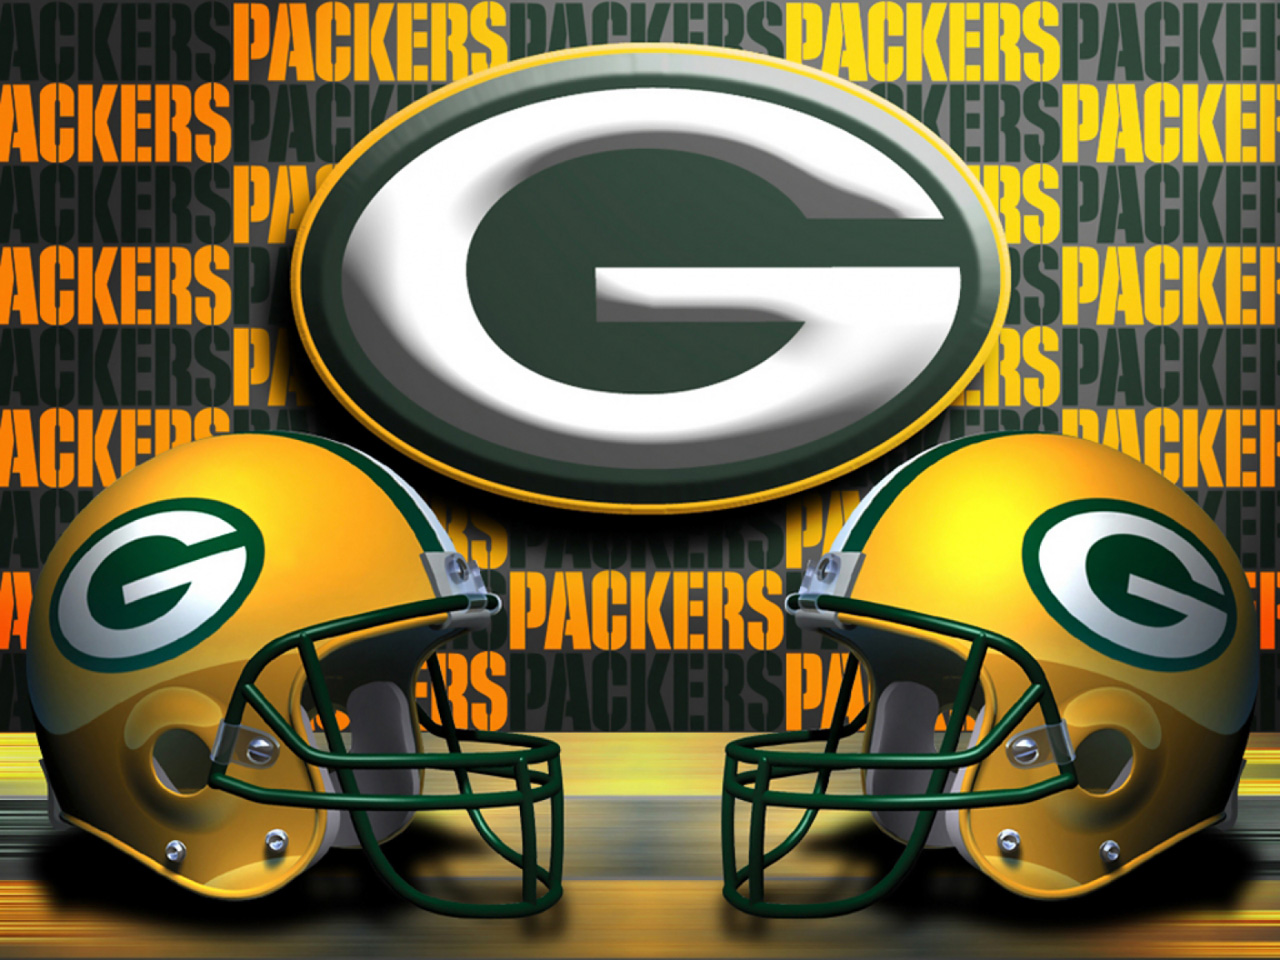 Greenbay Packers Wallpaper Free Hd Backgrounds